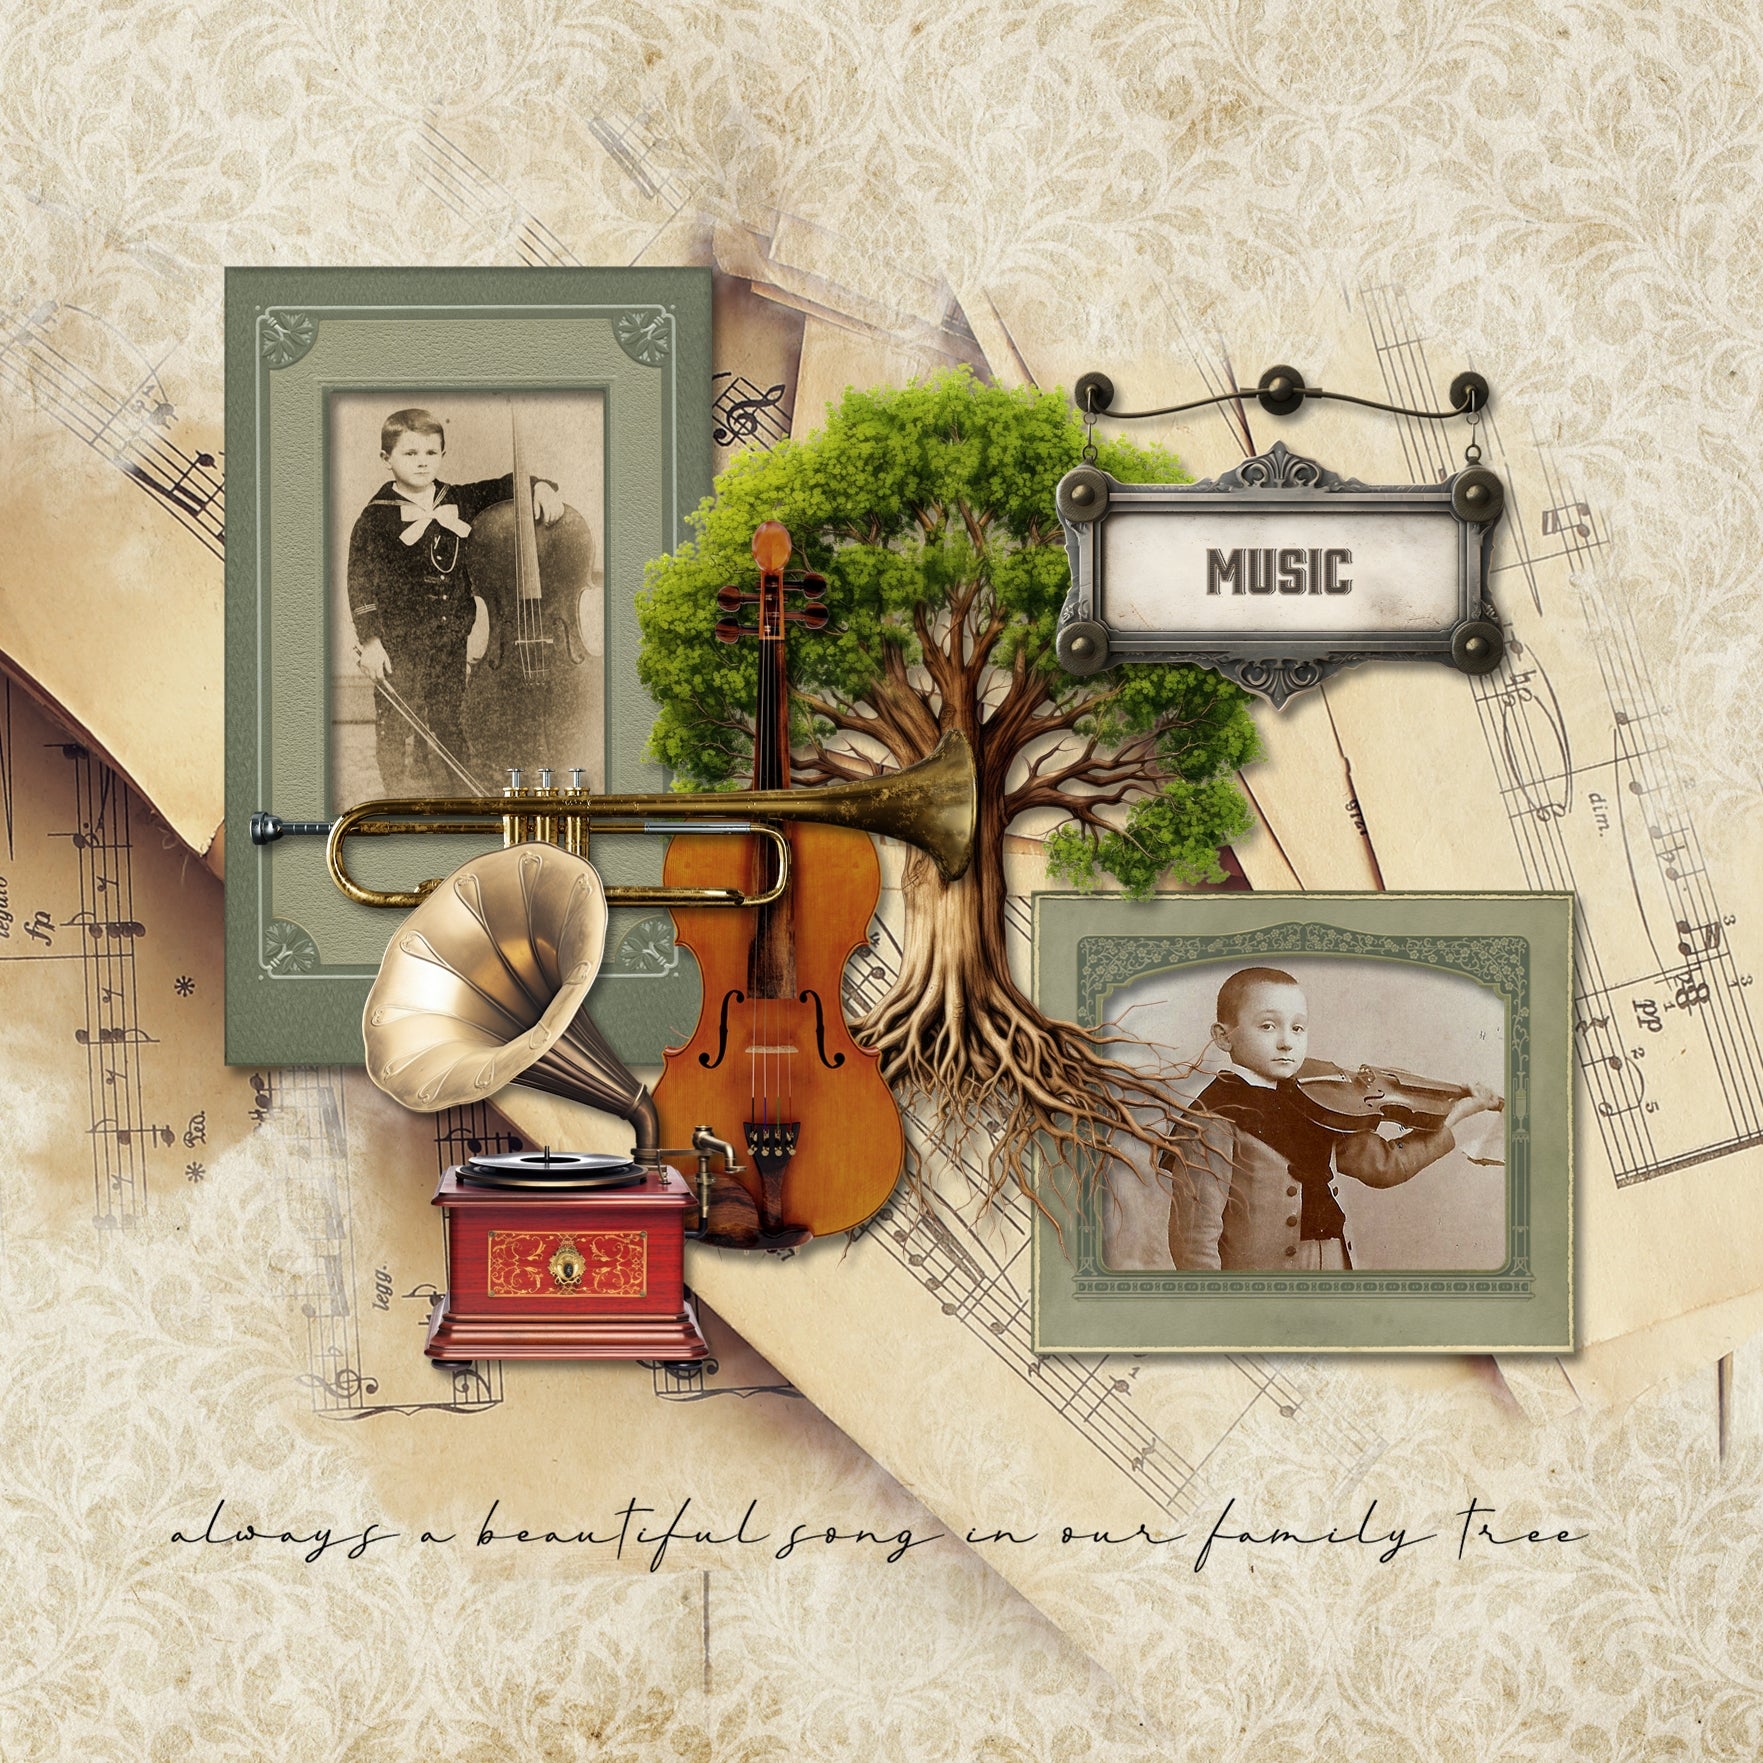 Great for genealogy and family history albums and keepsake digital art pages, these ornate word art signs by Lucky Girl Creative are perfect for layering with your antique photographs to give that realistic vintage look. Word art includes Antiques, Art, Collectibles, Faith, Family, Genealogy, Handmade, Heritage, History, Home, Jewelry, Jewellery, Journals, Letters, Library, Literature, Love, Memories, Music, Nature, Photographs, Theater, Theatre, Time, Travel, Treasures, and Vintage.